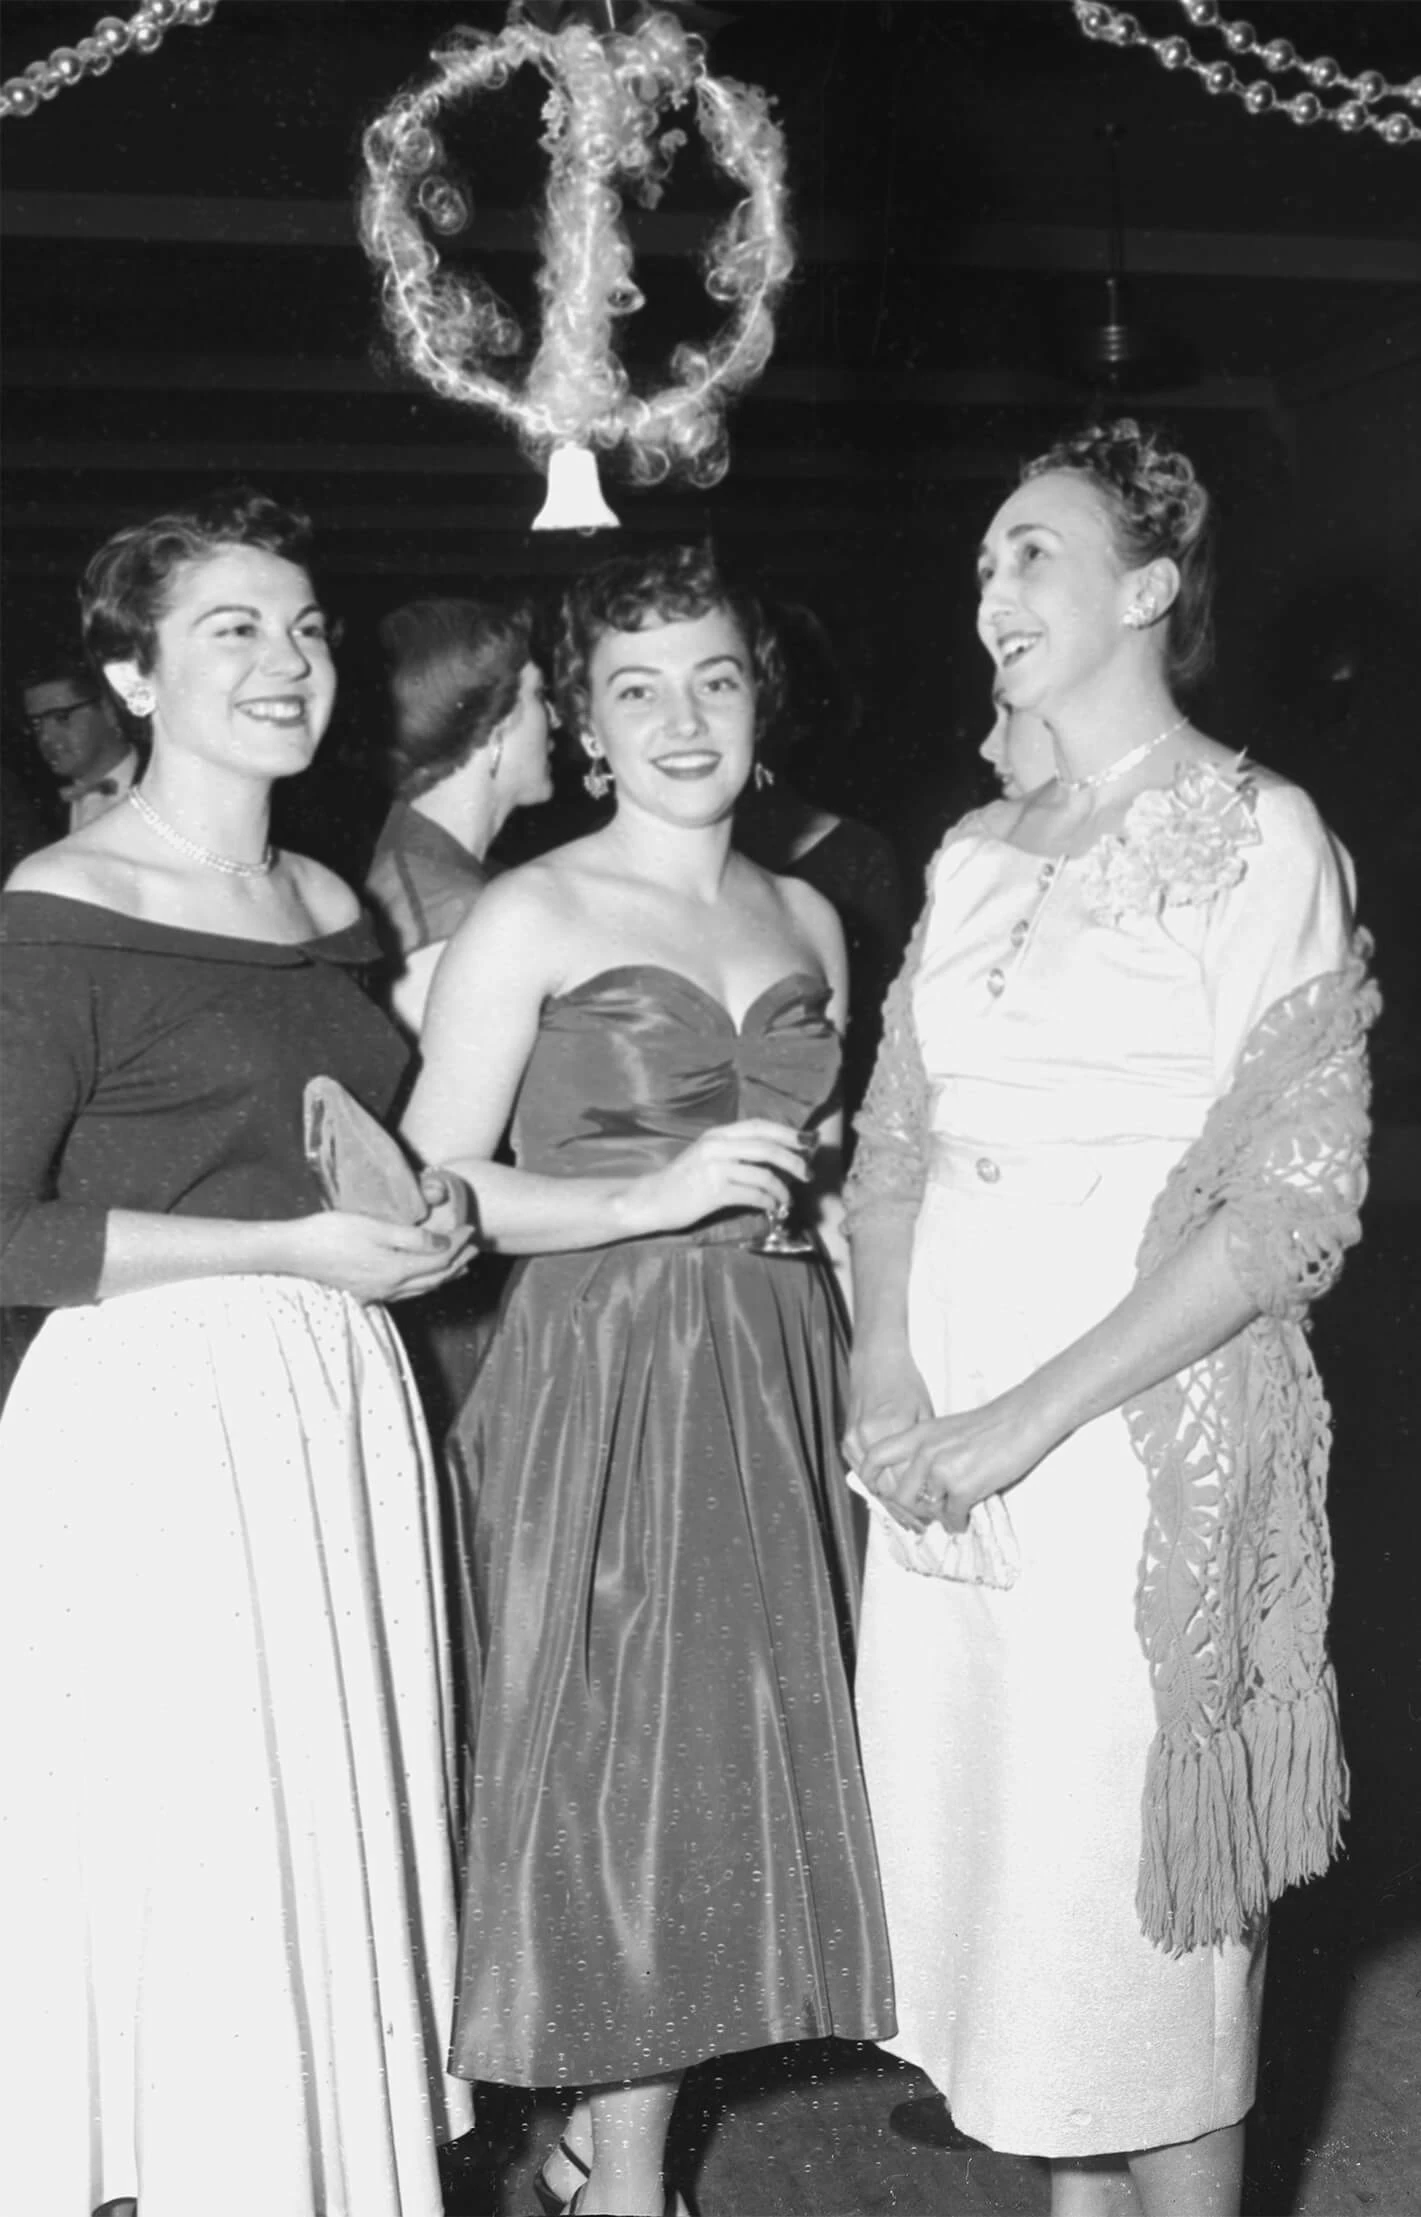 Black and white photo of three women in wearing formal dresses at a holiday party. One woman is carrying a glass and the other two women are carrying clutches.